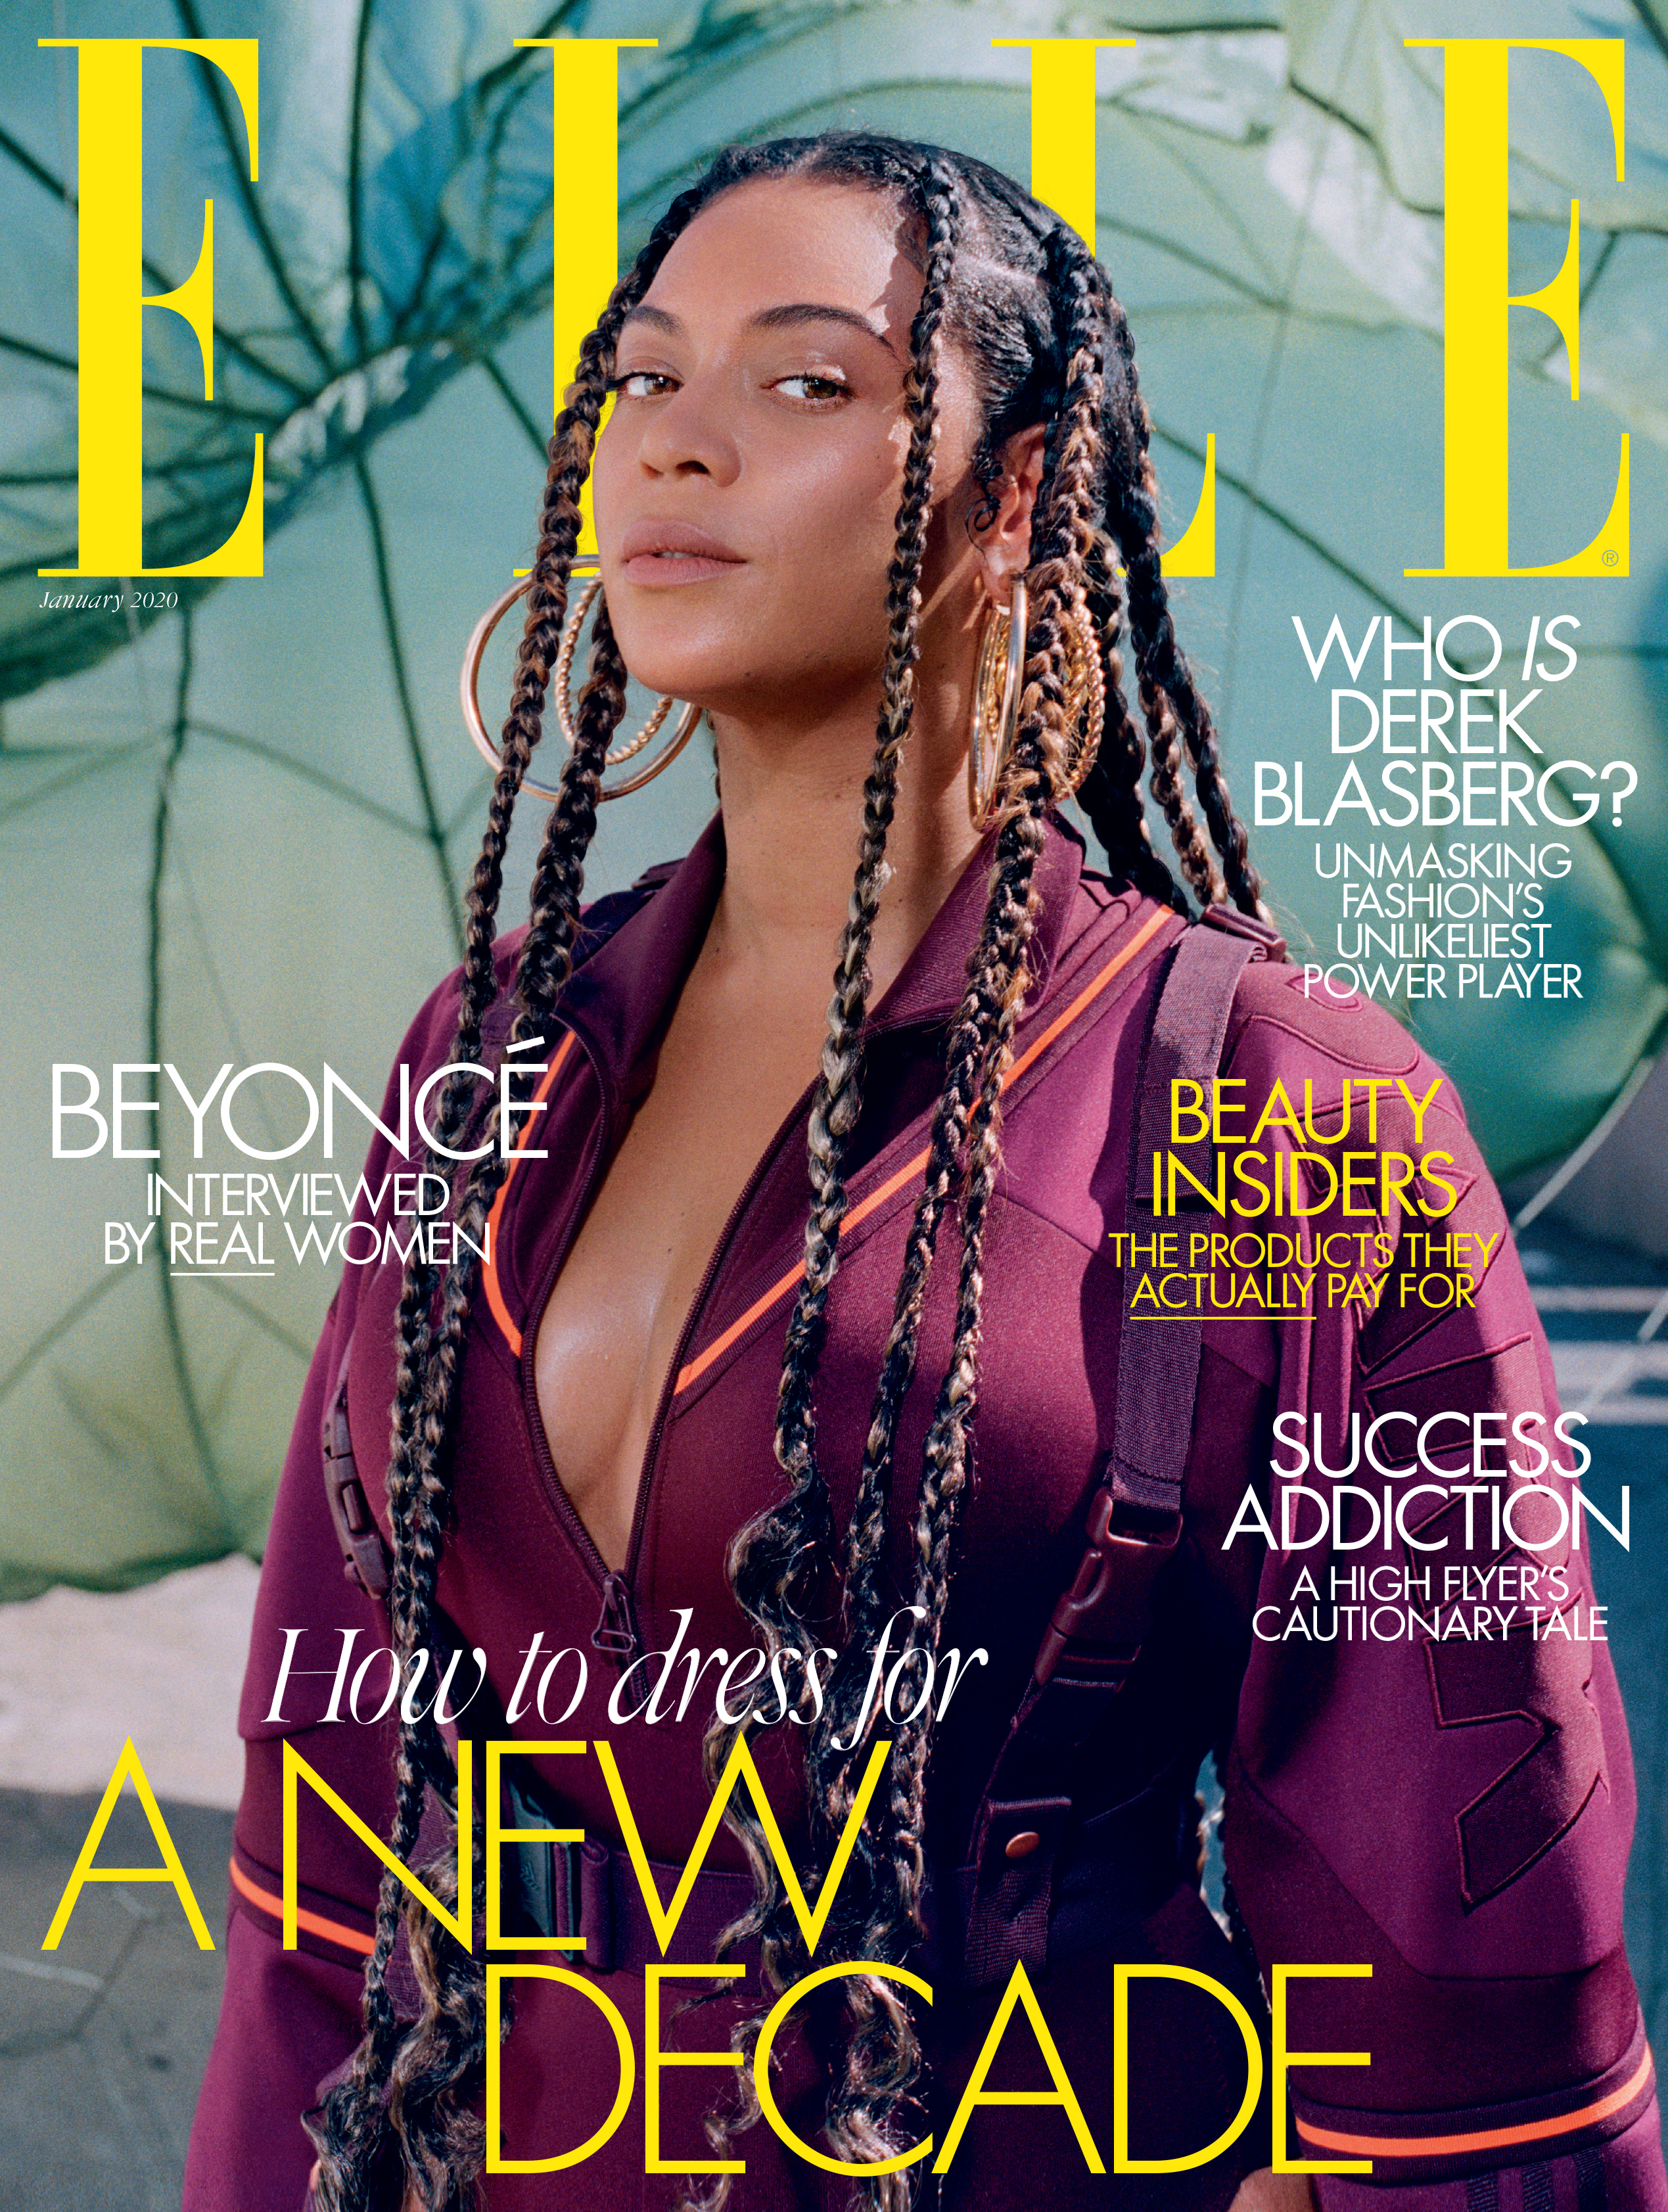 Beyonce on the cover of Elle UK magazine